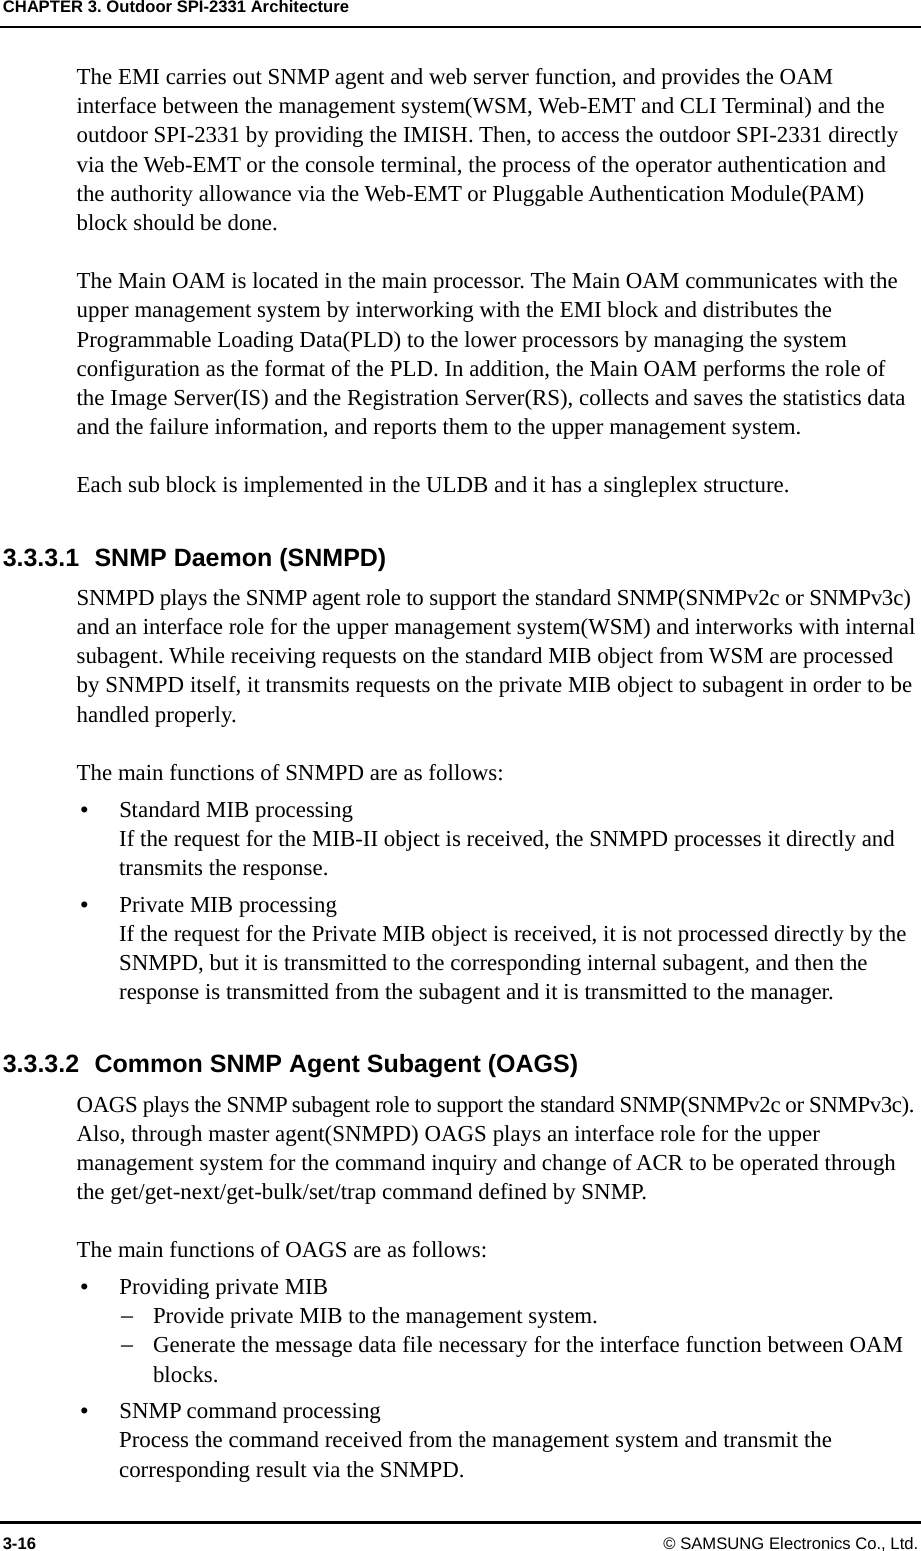 CHAPTER 3. Outdoor SPI-2331 Architecture 3-16 © SAMSUNG Electronics Co., Ltd. The EMI carries out SNMP agent and web server function, and provides the OAM interface between the management system(WSM, Web-EMT and CLI Terminal) and the outdoor SPI-2331 by providing the IMISH. Then, to access the outdoor SPI-2331 directly via the Web-EMT or the console terminal, the process of the operator authentication and the authority allowance via the Web-EMT or Pluggable Authentication Module(PAM) block should be done.  The Main OAM is located in the main processor. The Main OAM communicates with the upper management system by interworking with the EMI block and distributes the Programmable Loading Data(PLD) to the lower processors by managing the system configuration as the format of the PLD. In addition, the Main OAM performs the role of the Image Server(IS) and the Registration Server(RS), collects and saves the statistics data and the failure information, and reports them to the upper management system.    Each sub block is implemented in the ULDB and it has a singleplex structure.  3.3.3.1  SNMP Daemon (SNMPD) SNMPD plays the SNMP agent role to support the standard SNMP(SNMPv2c or SNMPv3c) and an interface role for the upper management system(WSM) and interworks with internal subagent. While receiving requests on the standard MIB object from WSM are processed by SNMPD itself, it transmits requests on the private MIB object to subagent in order to be handled properly.    The main functions of SNMPD are as follows: y Standard MIB processingIf the request for the MIB-II object is received, the SNMPD processes it directly and transmits the response. y Private MIB processingIf the request for the Private MIB object is received, it is not processed directly by the SNMPD, but it is transmitted to the corresponding internal subagent, and then the response is transmitted from the subagent and it is transmitted to the manager.  3.3.3.2  Common SNMP Agent Subagent (OAGS) OAGS plays the SNMP subagent role to support the standard SNMP(SNMPv2c or SNMPv3c). Also, through master agent(SNMPD) OAGS plays an interface role for the upper management system for the command inquiry and change of ACR to be operated through the get/get-next/get-bulk/set/trap command defined by SNMP.  The main functions of OAGS are as follows: y Providing private MIB − Provide private MIB to the management system. − Generate the message data file necessary for the interface function between OAM blocks. y SNMP command processing Process the command received from the management system and transmit the corresponding result via the SNMPD. 